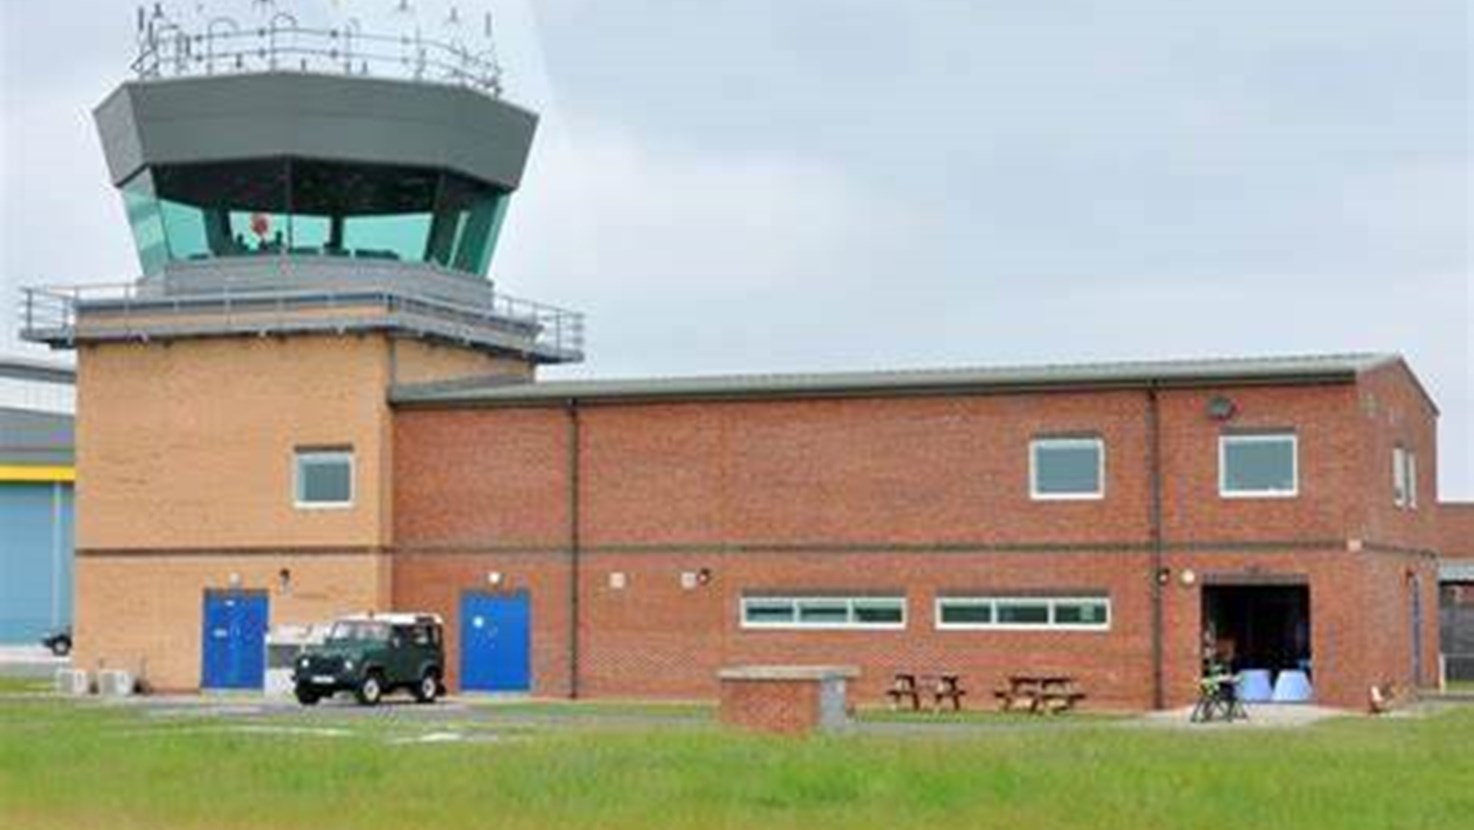 View all of the events and meetings that DPCC Phil Clark attended or hosted at RAF Coningsby in 2022